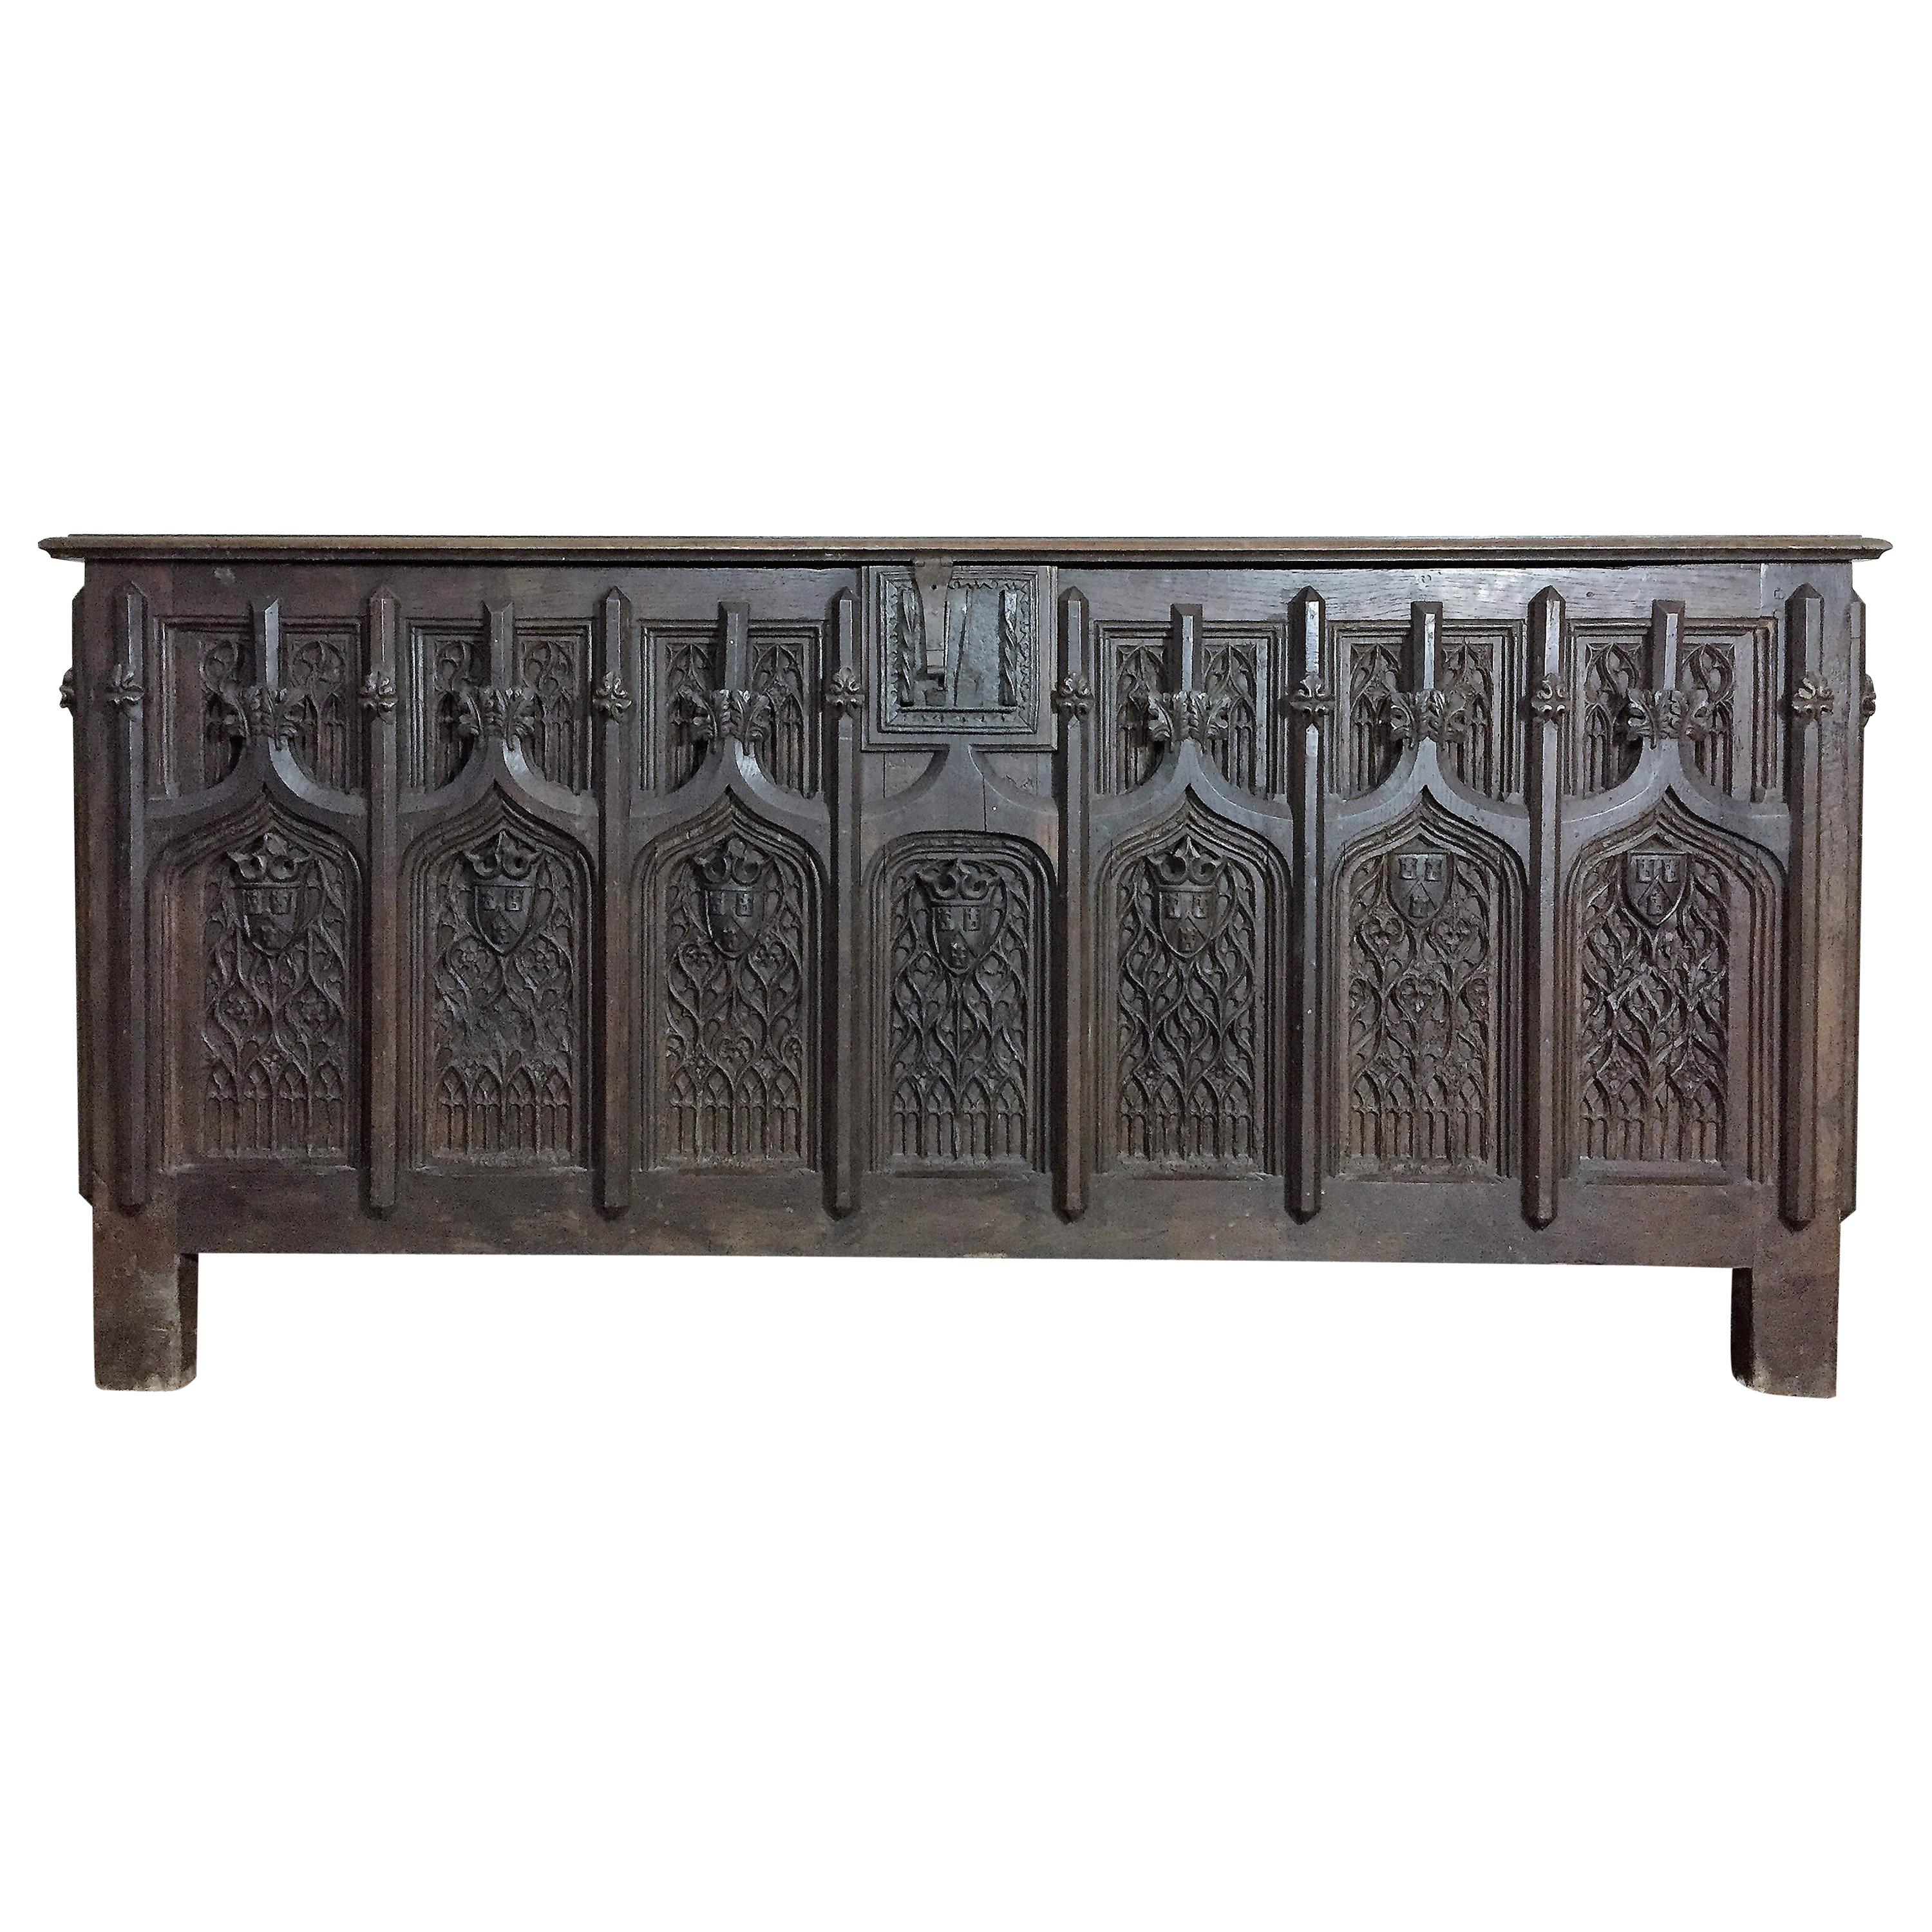 Important Gothic Oak Chest, 16th and 19th Century